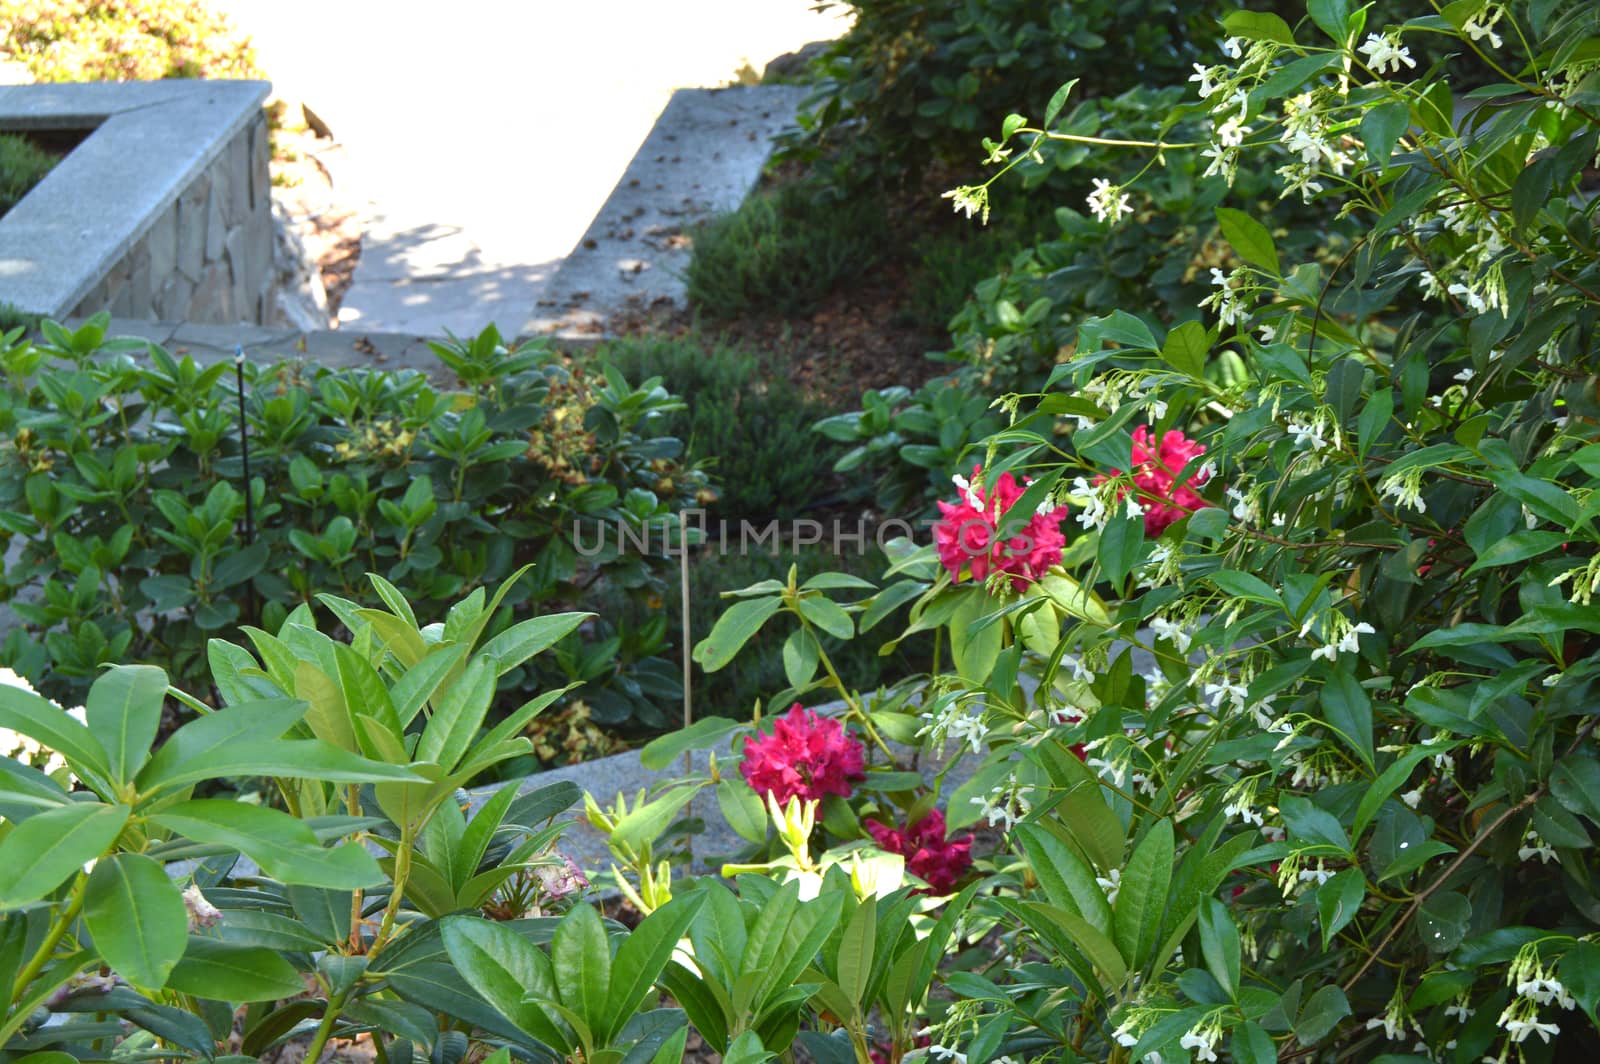 Framed view of flowers in the foreground, blurred background of the Park, summer Sunny day by claire_lucia